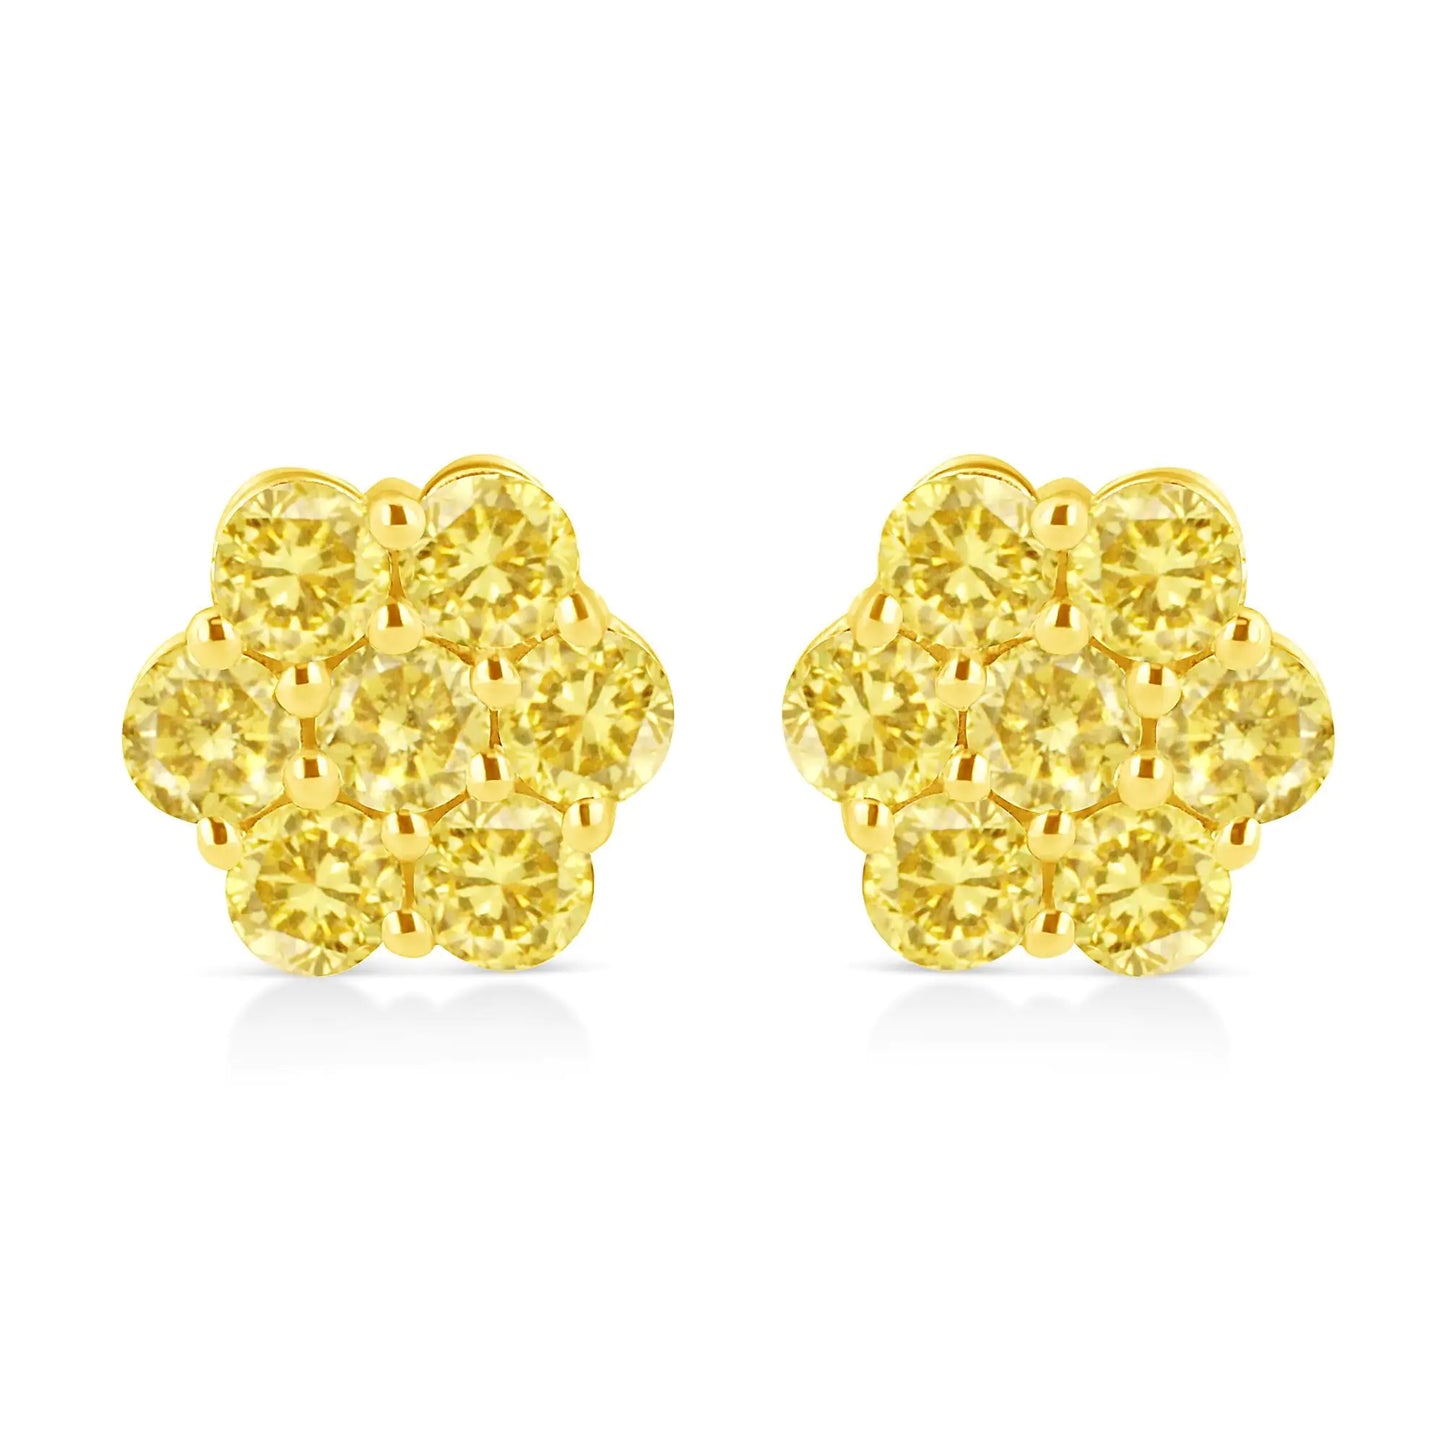 .925 Sterling Silver  Prong Set Round-Cut Treated Colored Diamond Floral Cluster Stud Earring - Choice of Diamond Colors and Total Weights